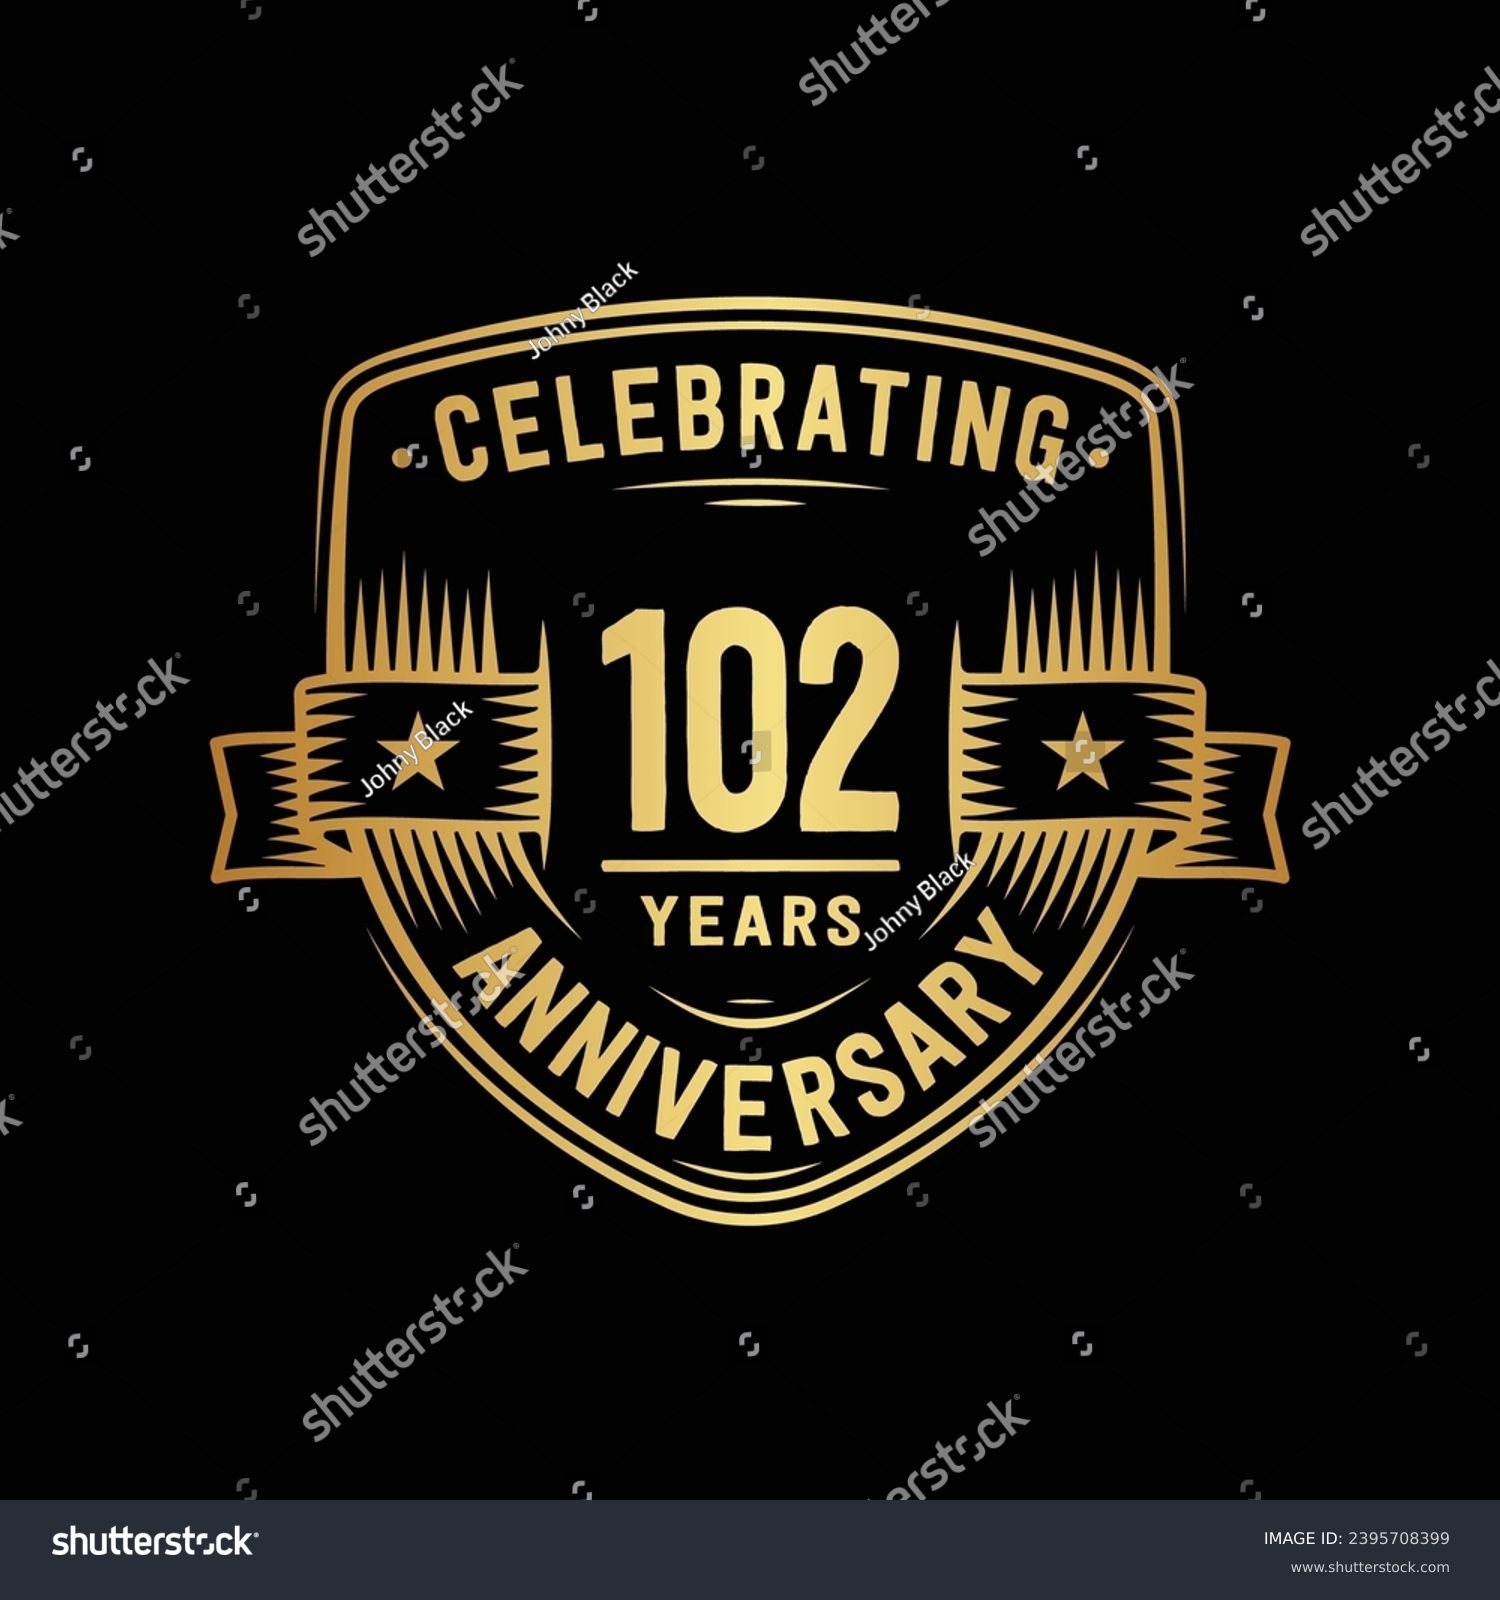 SVG of 102 years anniversary celebration shield design template. 102nd anniversary logo. Vector and illustration. svg